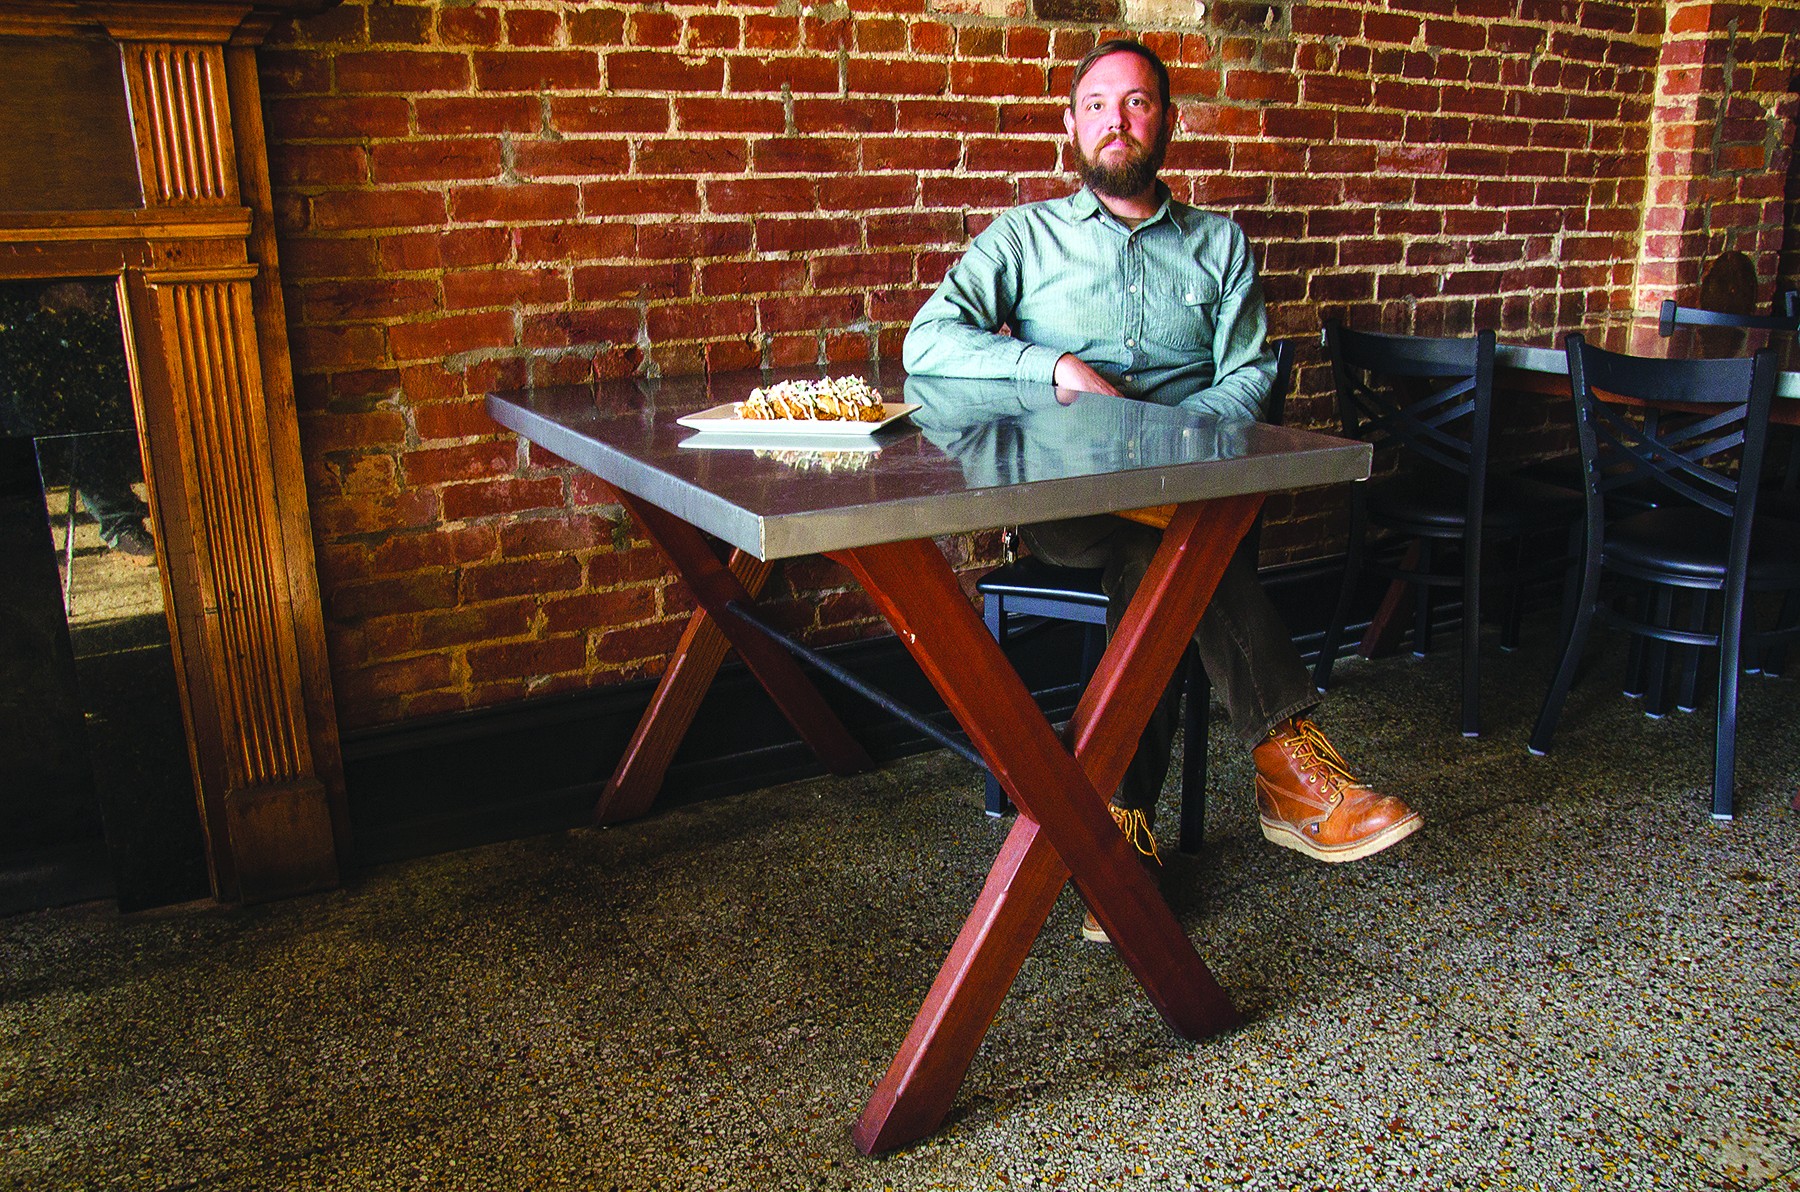 At Gospel Bird in New Albany, David Metcalf of Wooden Wire sits at one of his tables with a plate of Idgie & Ruth (fried green tomatoes, pimento cheese, slaw, horseradish). - photo by Nik Vechery